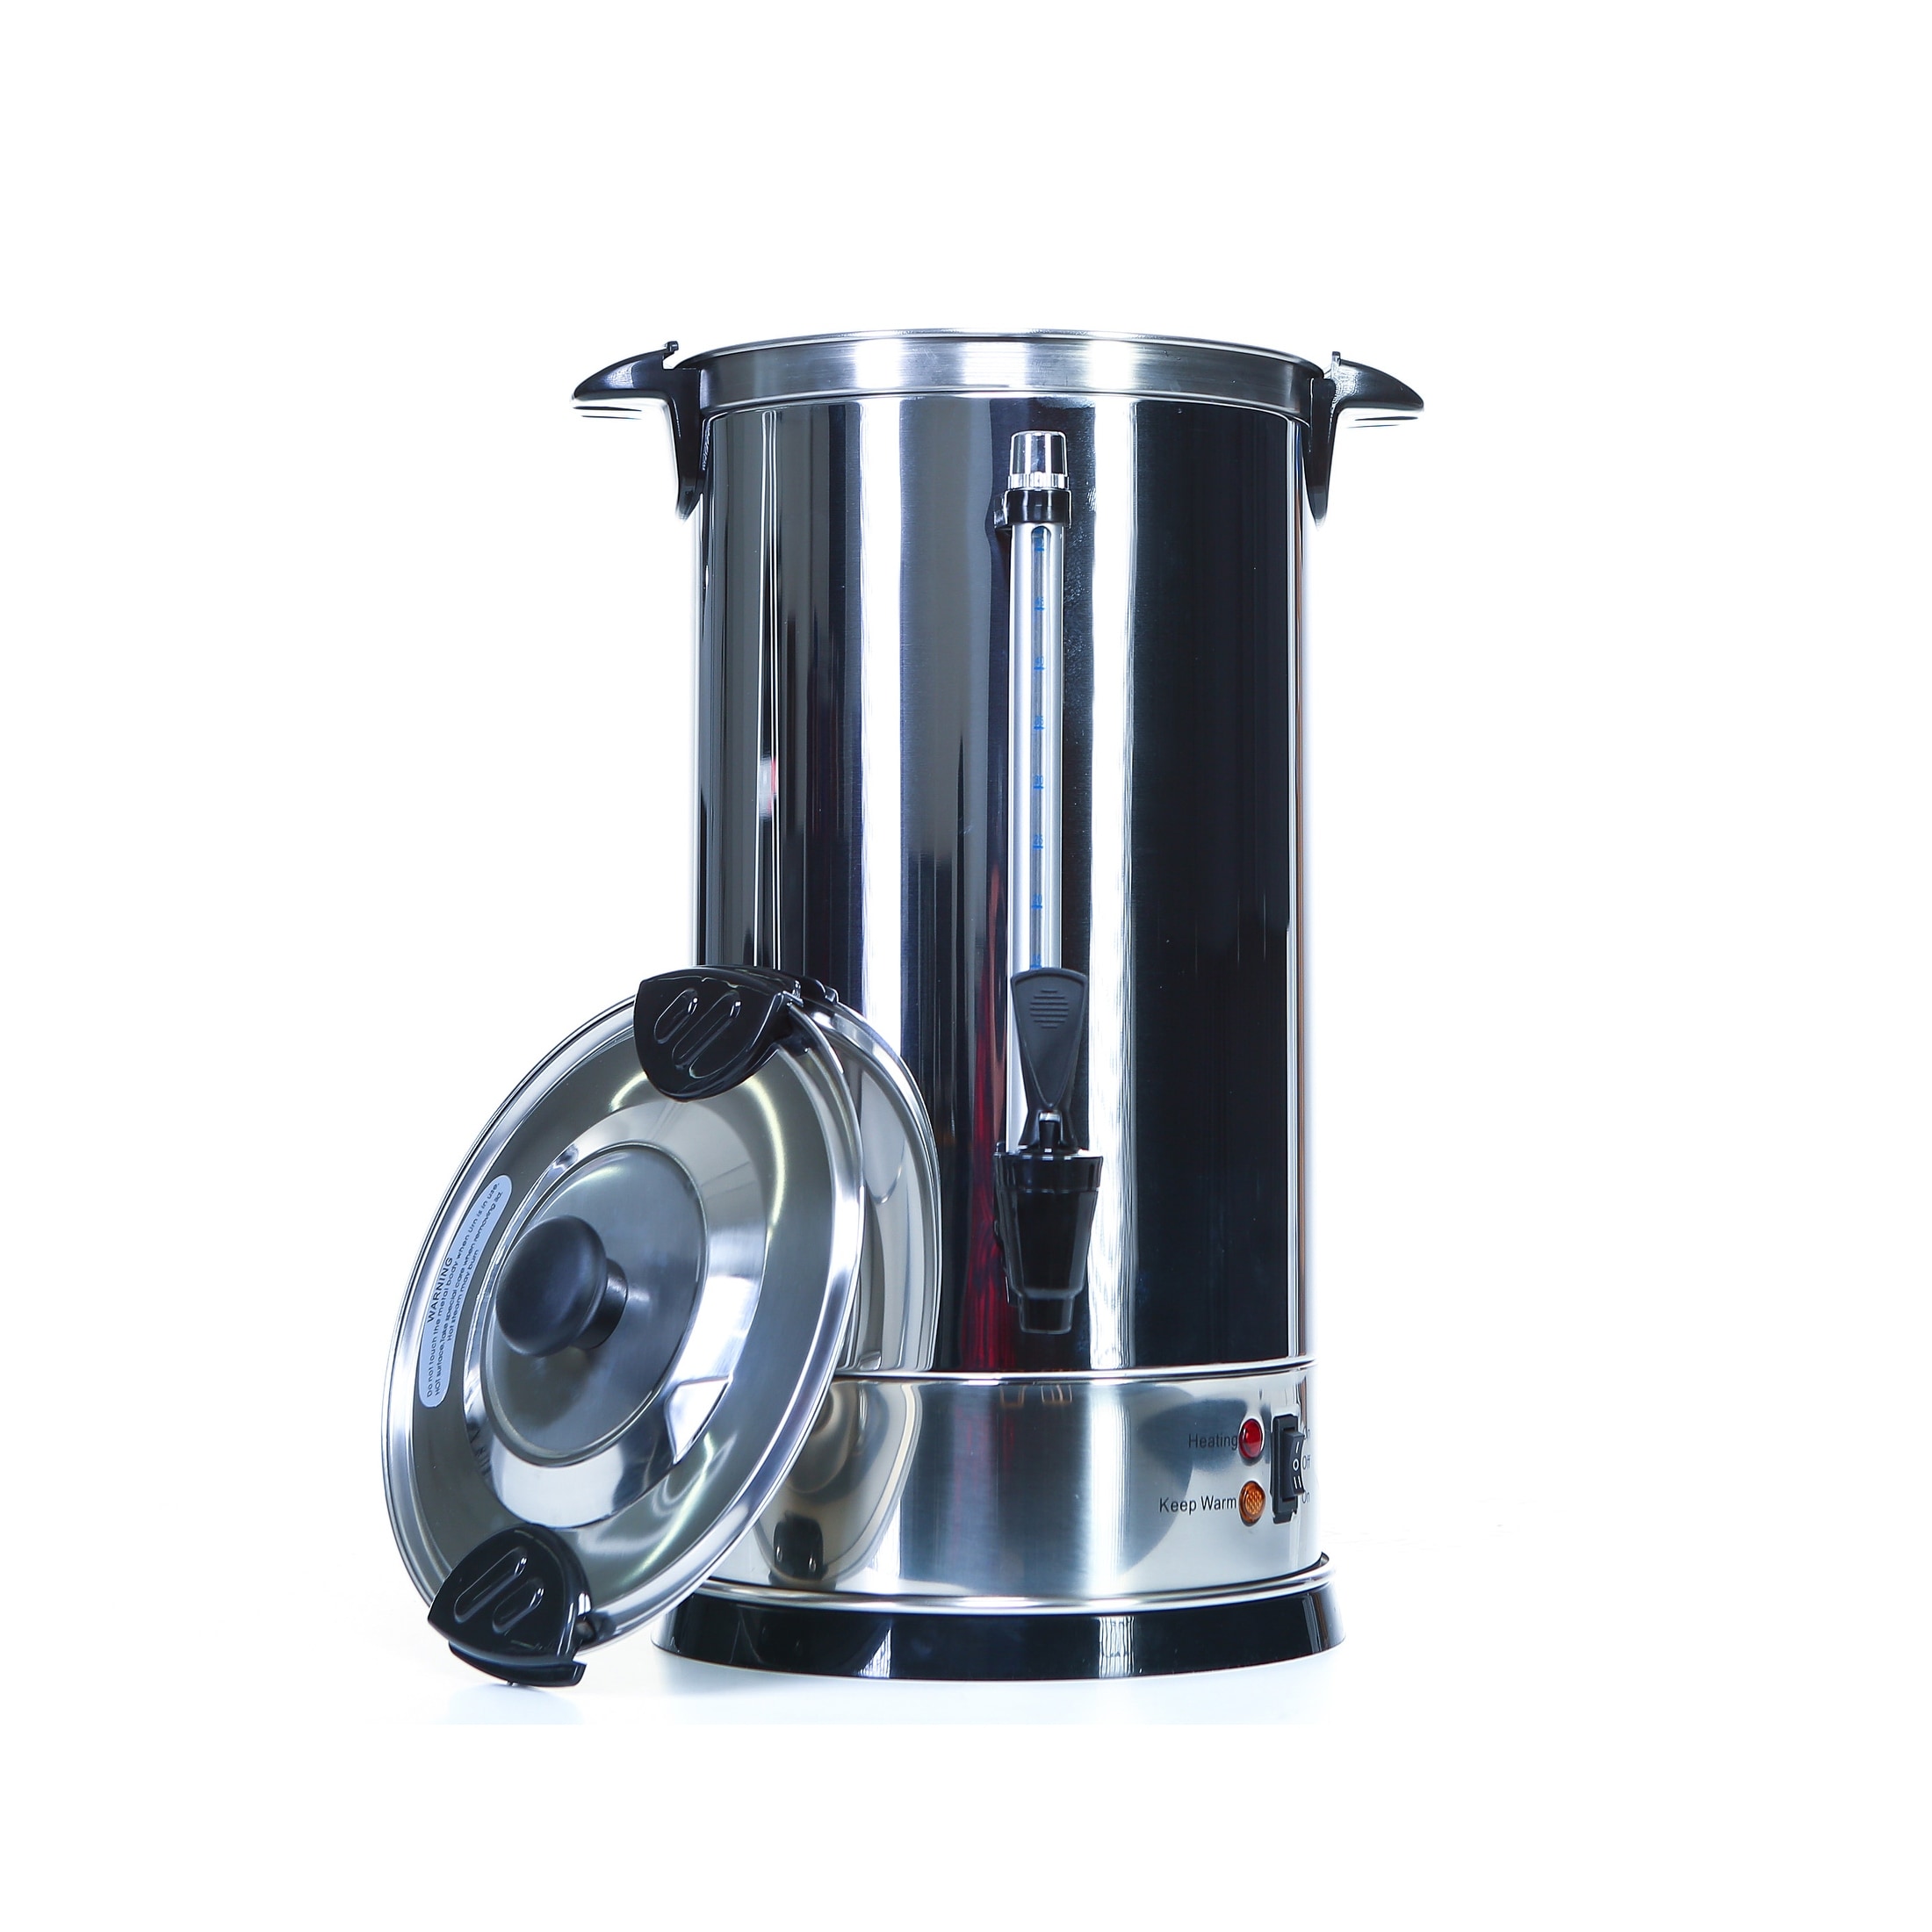 Stainless Steel Coffee Urn, Bounce with Fun Times